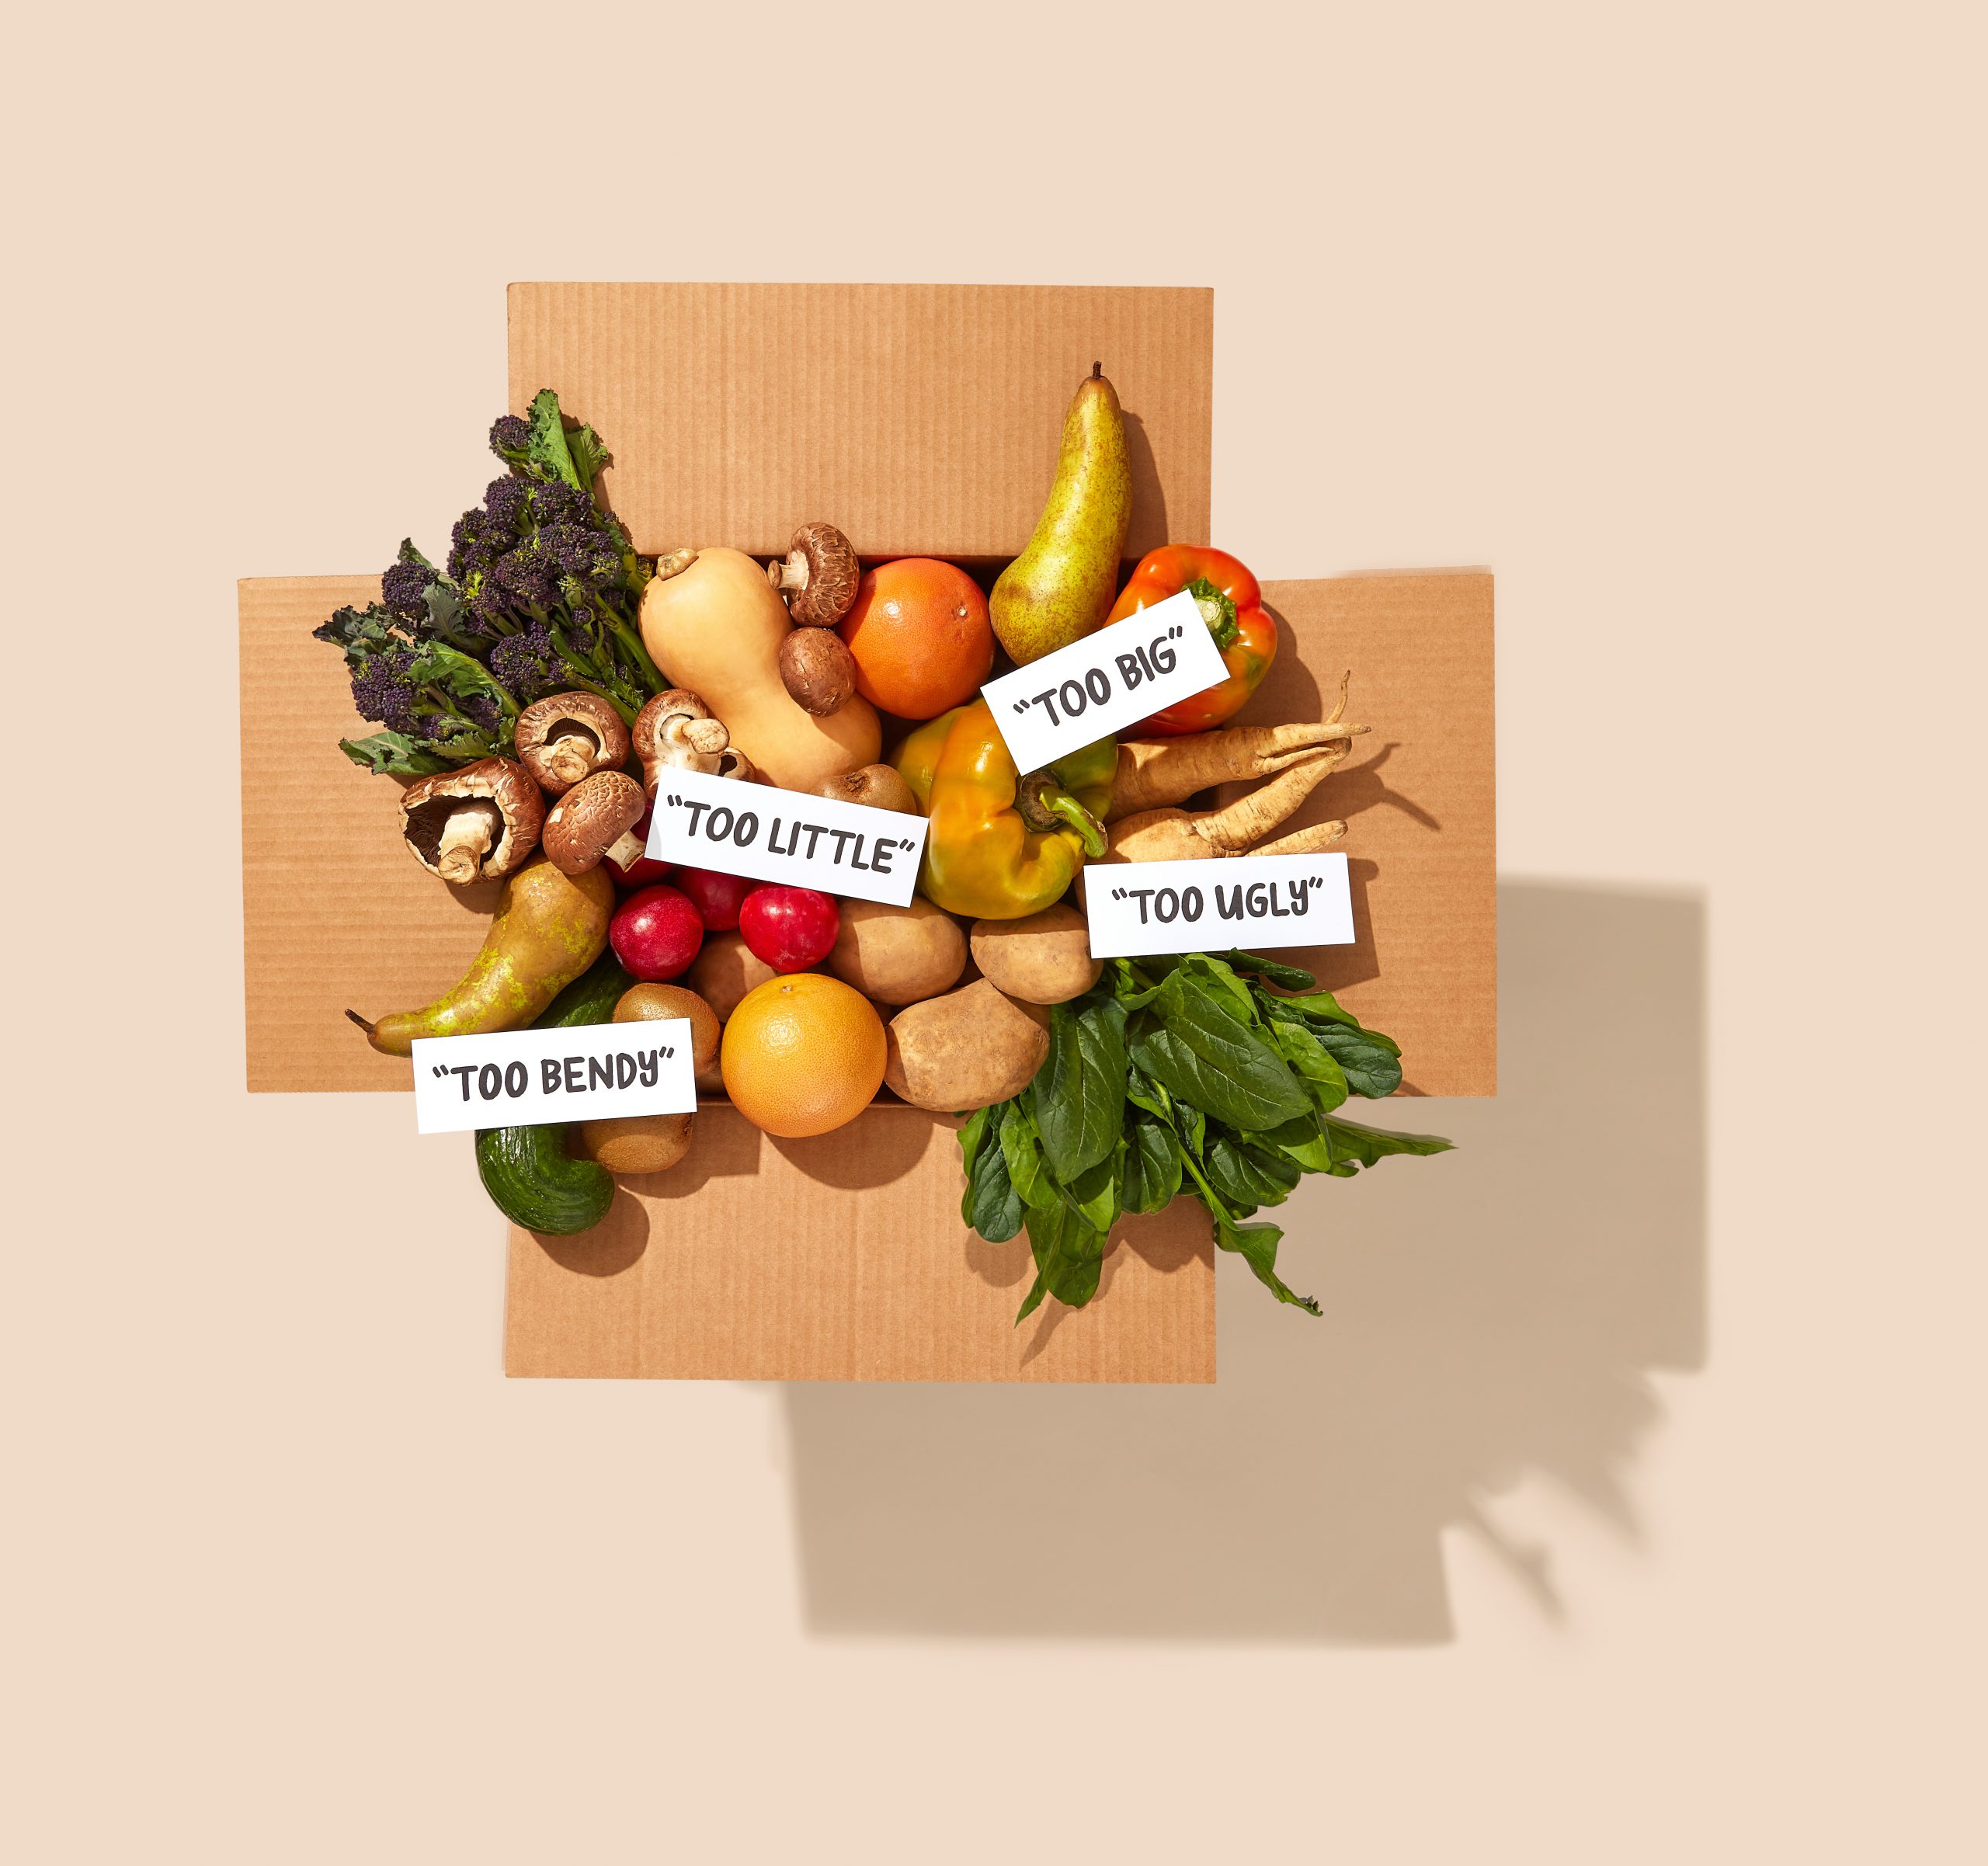 A variety of fruits and vegetables, labeled with tags like 